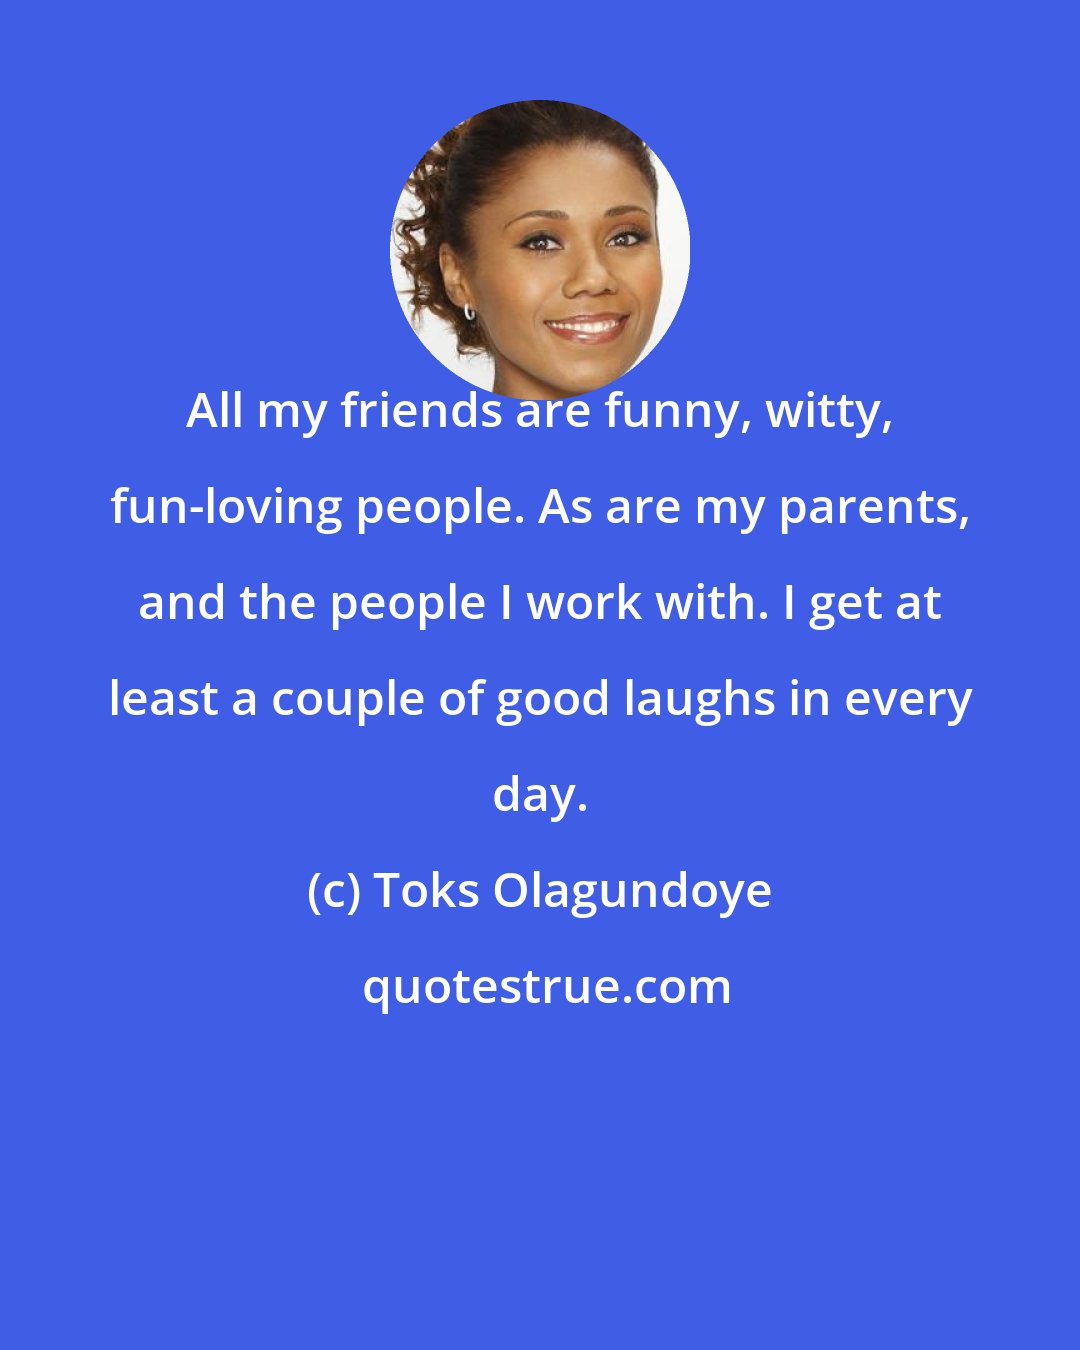 Toks Olagundoye: All my friends are funny, witty, fun-loving people. As are my parents, and the people I work with. I get at least a couple of good laughs in every day.